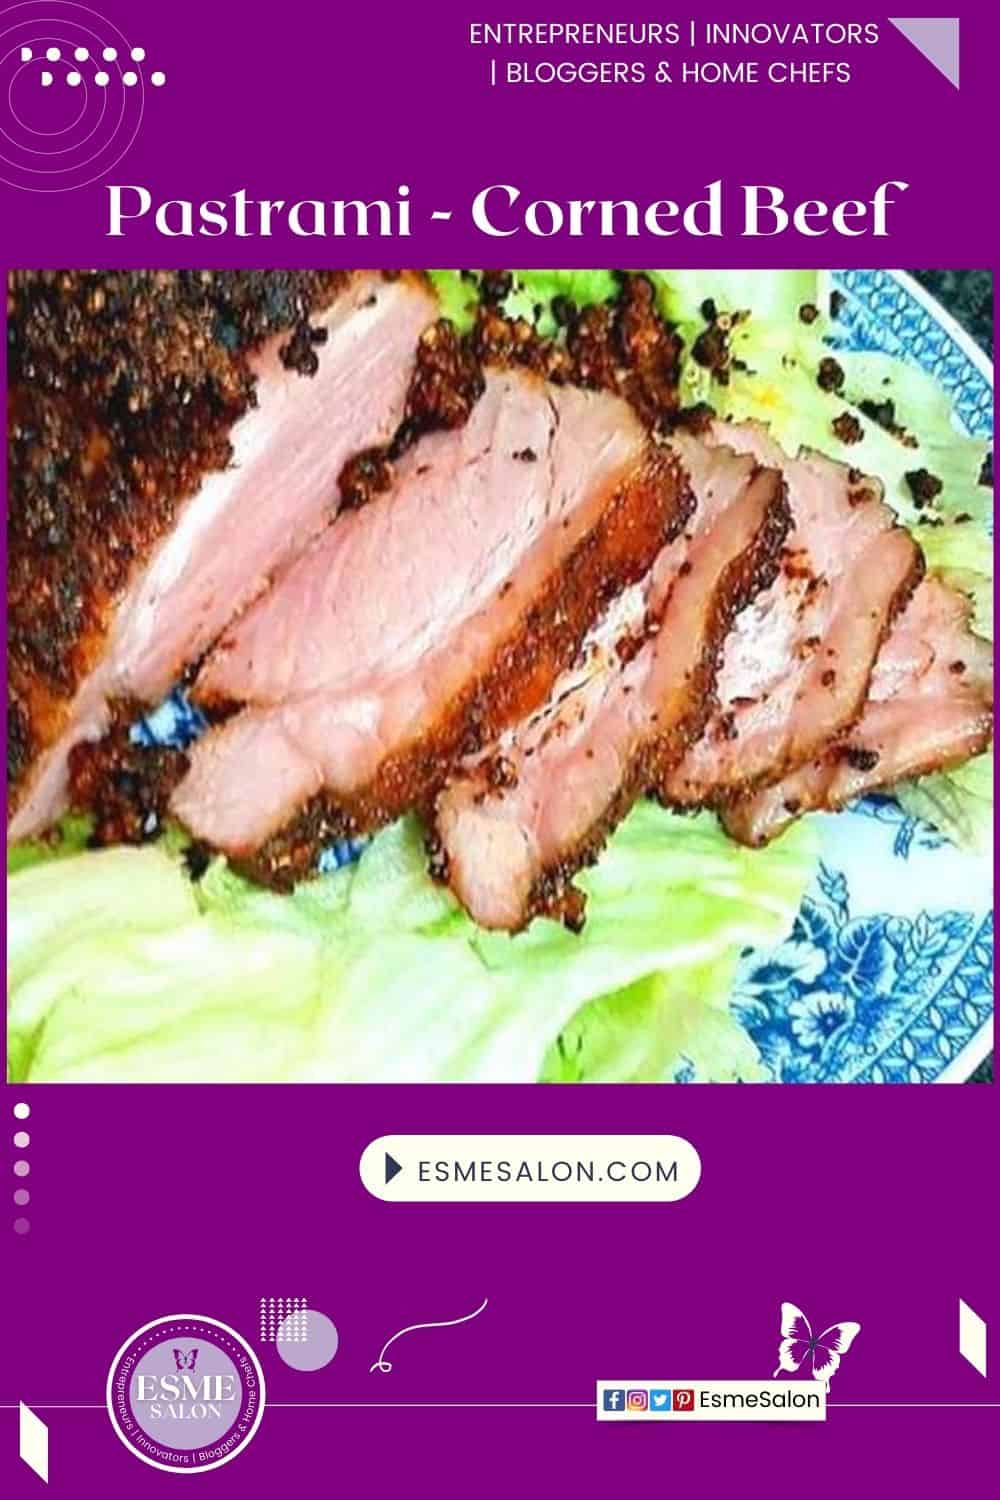 an image of sliced pastrami on a bed of lettuce